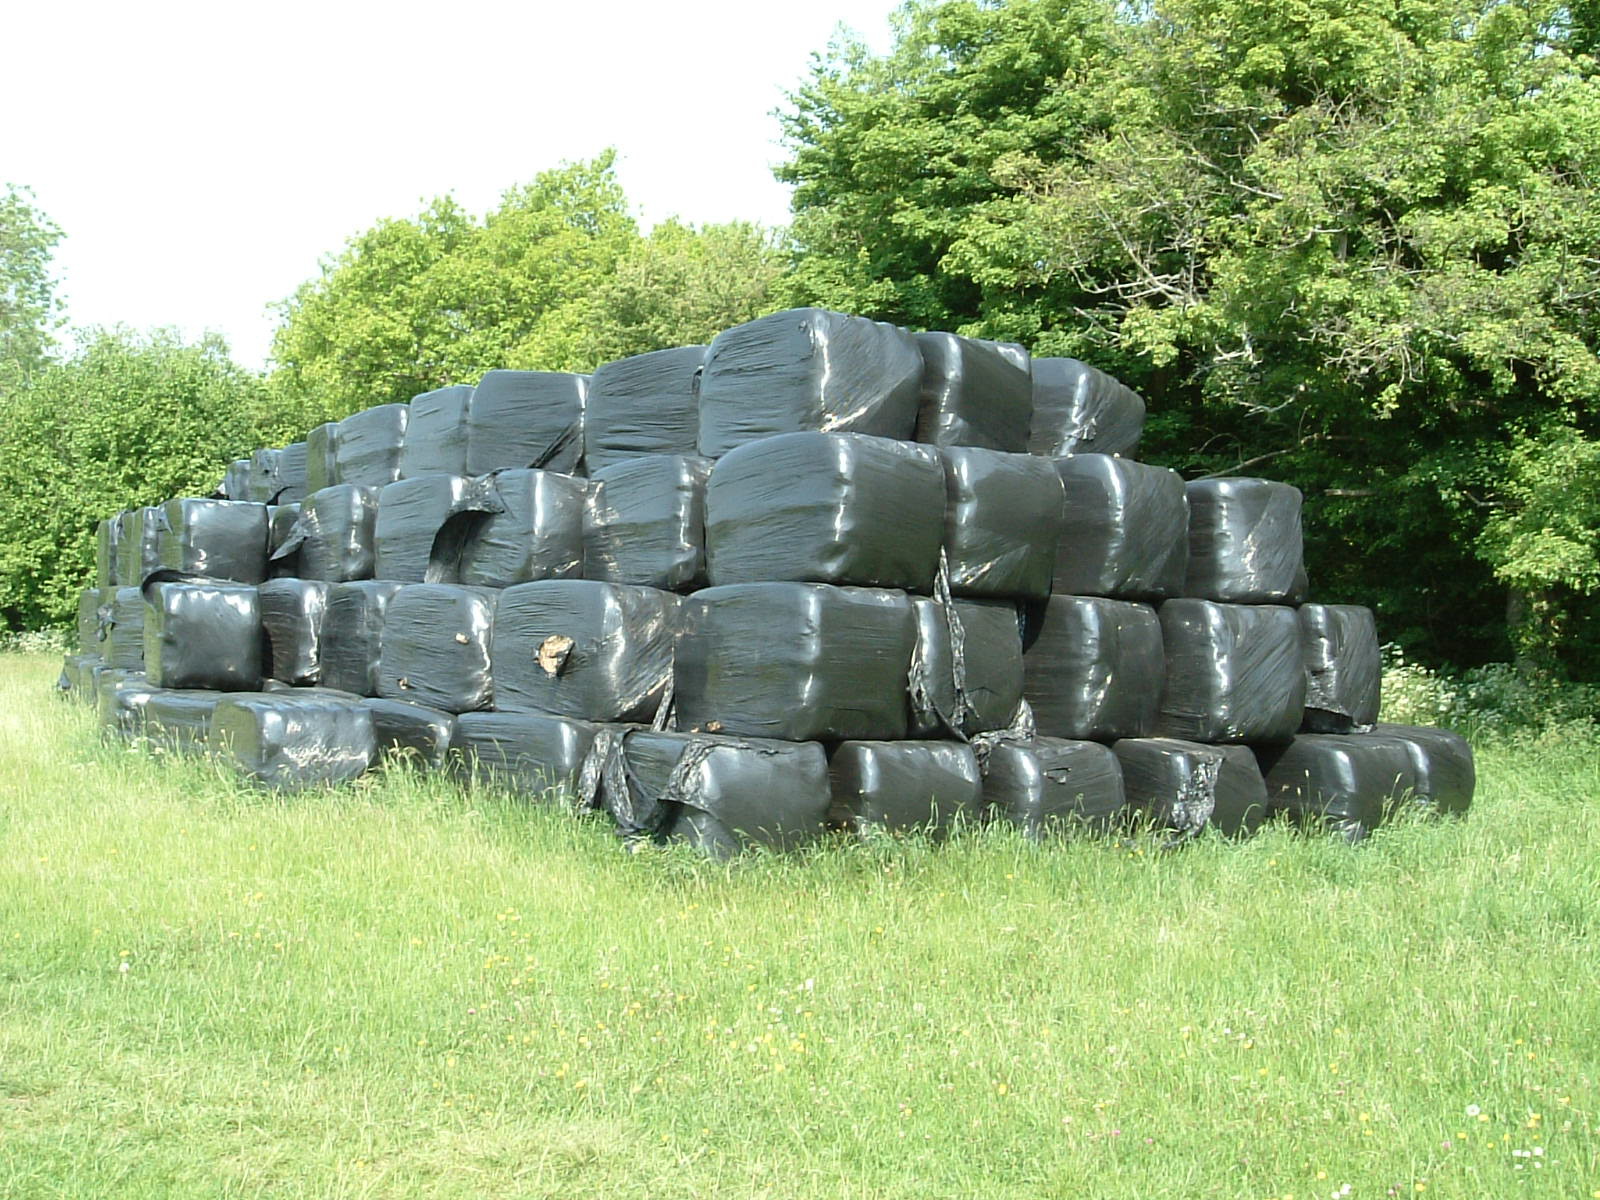 Silage bags stacked in a field